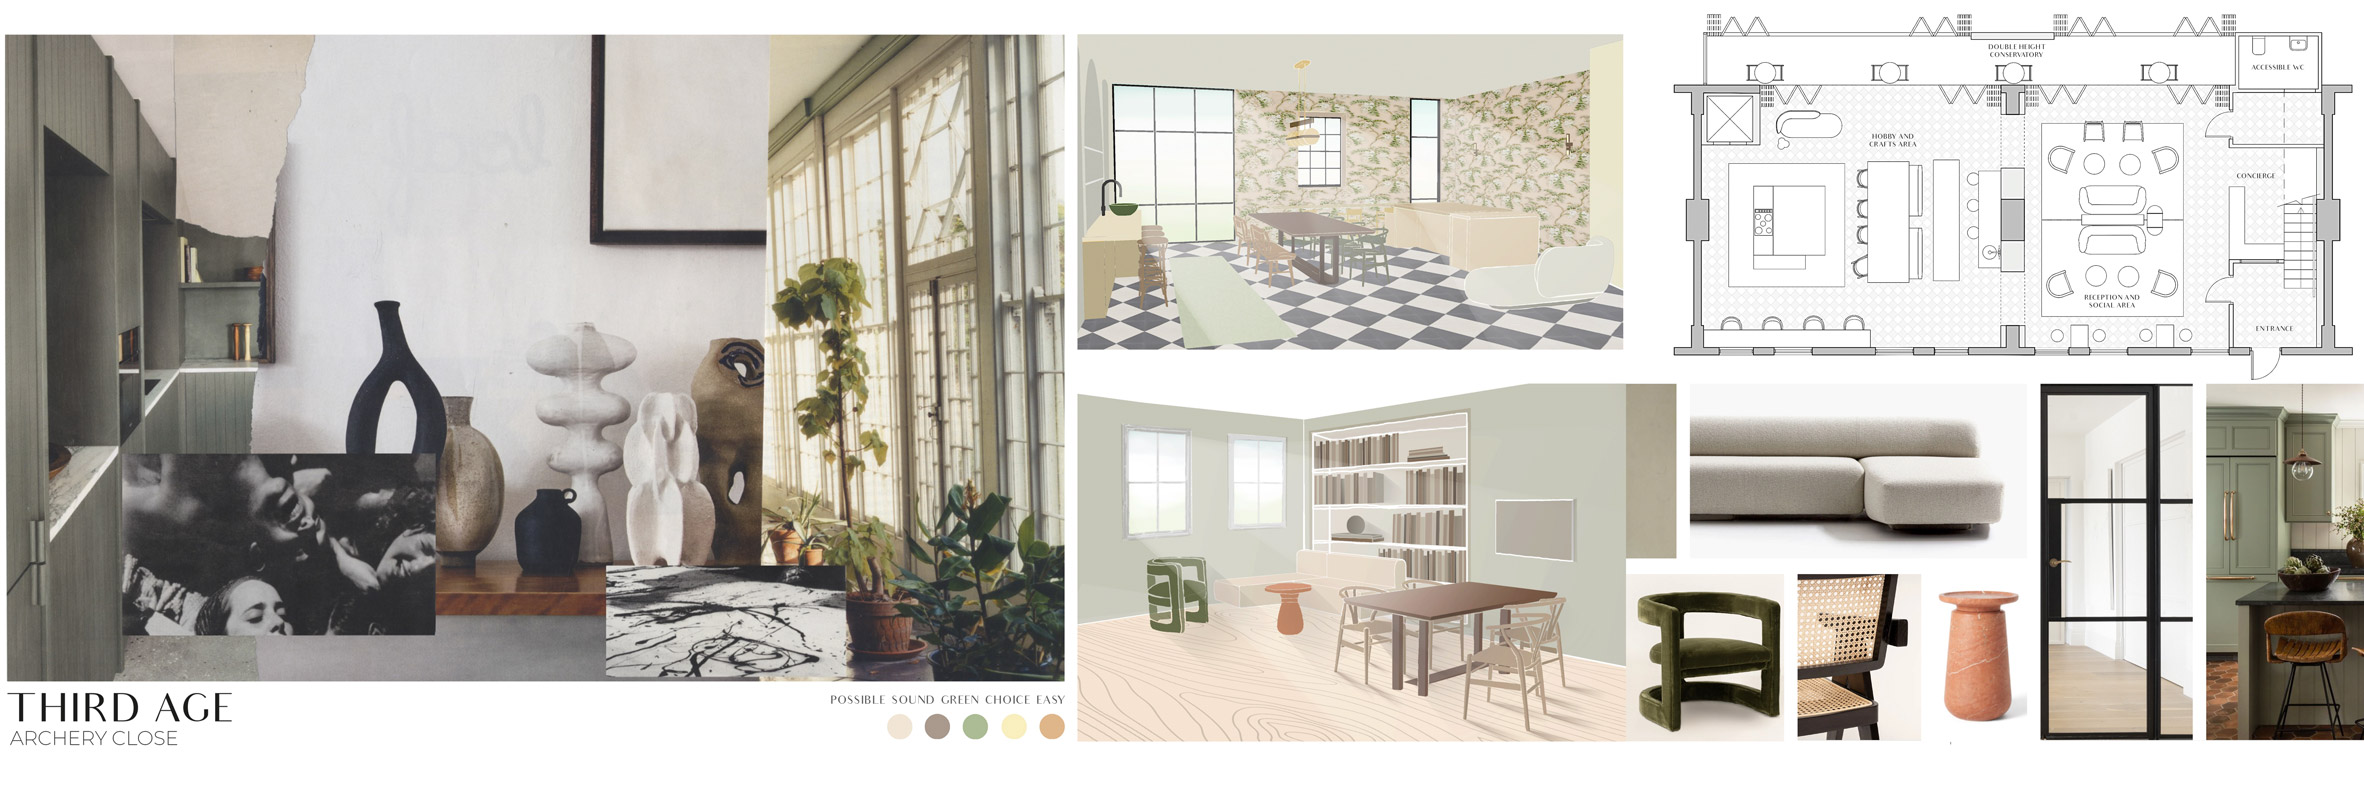 Moodboard, interior renders and plan of Third Age - A co-living concept for the ageing population by Kristin Björkman